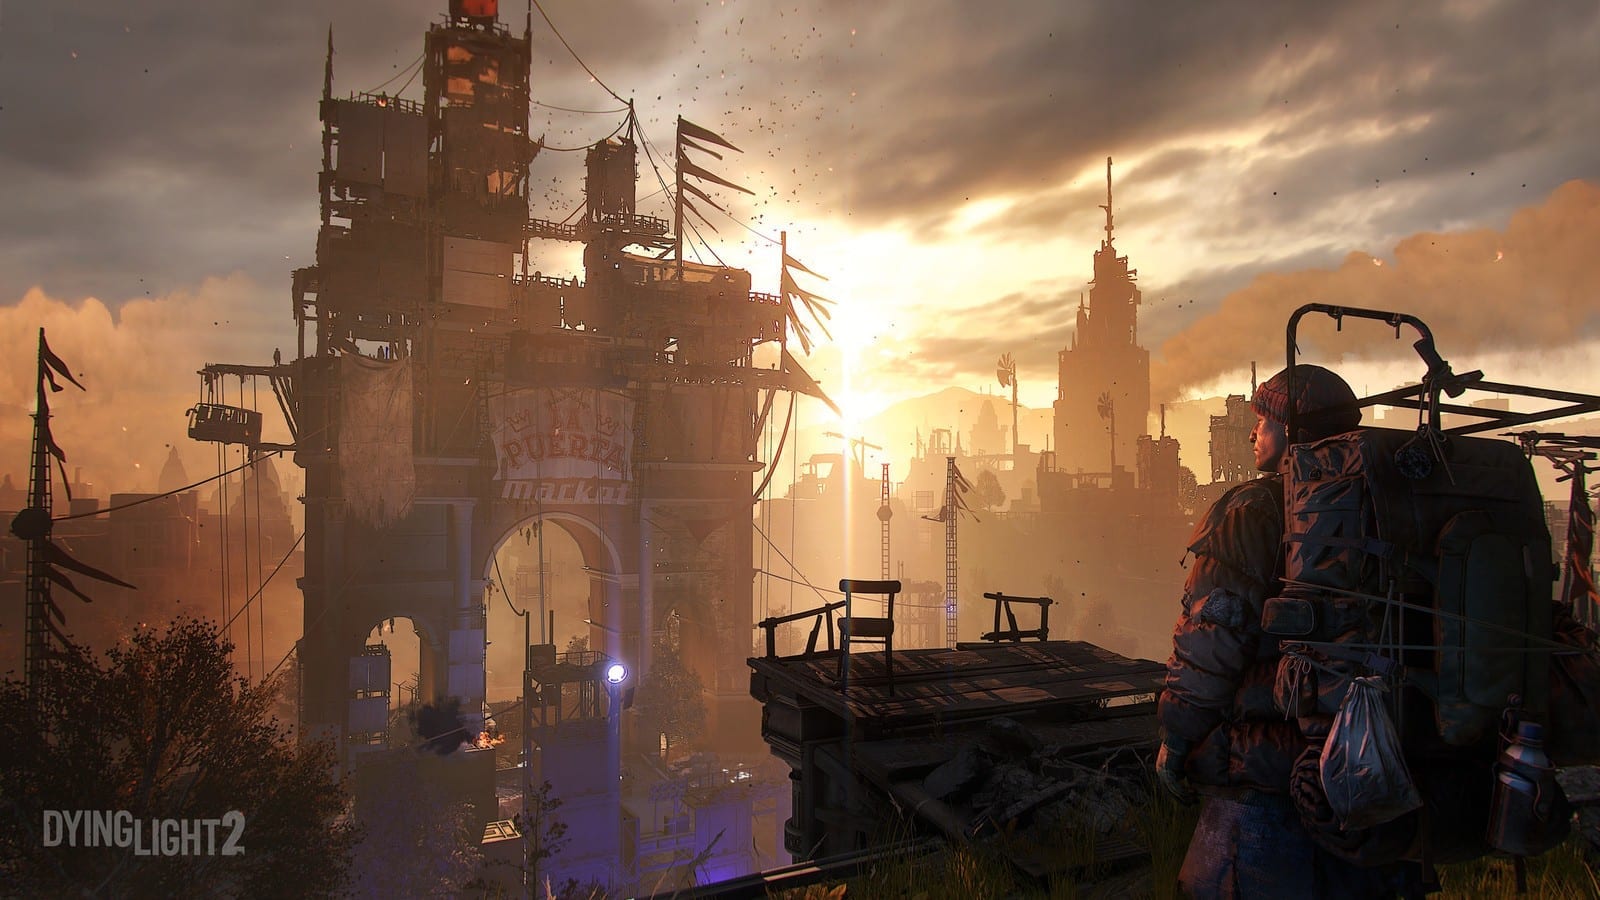 Dying Light 2 might Launch with Ray-Tracing and NVIDIA DLSS Support